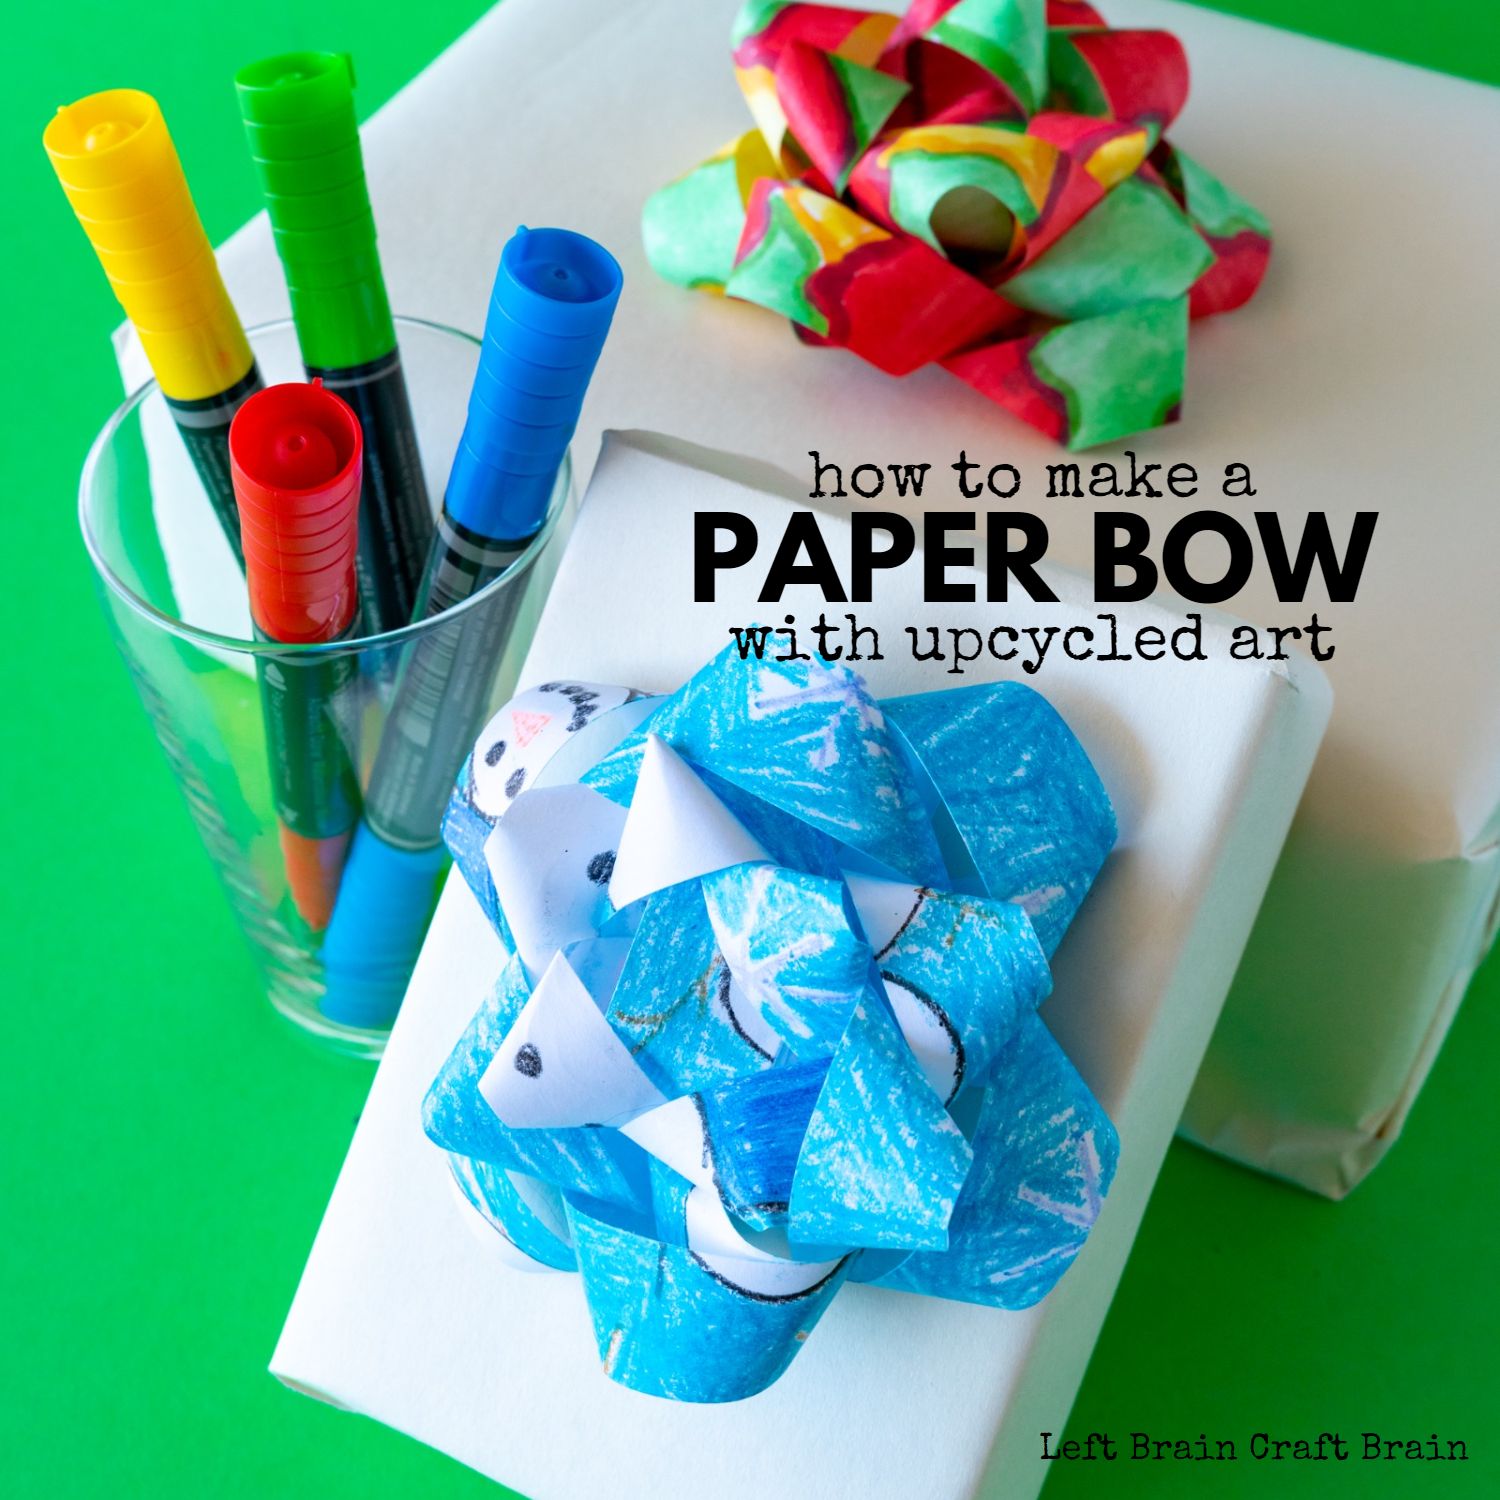 how-to-make-a-paper-bow-with-upcycled-art-1500x1500-1